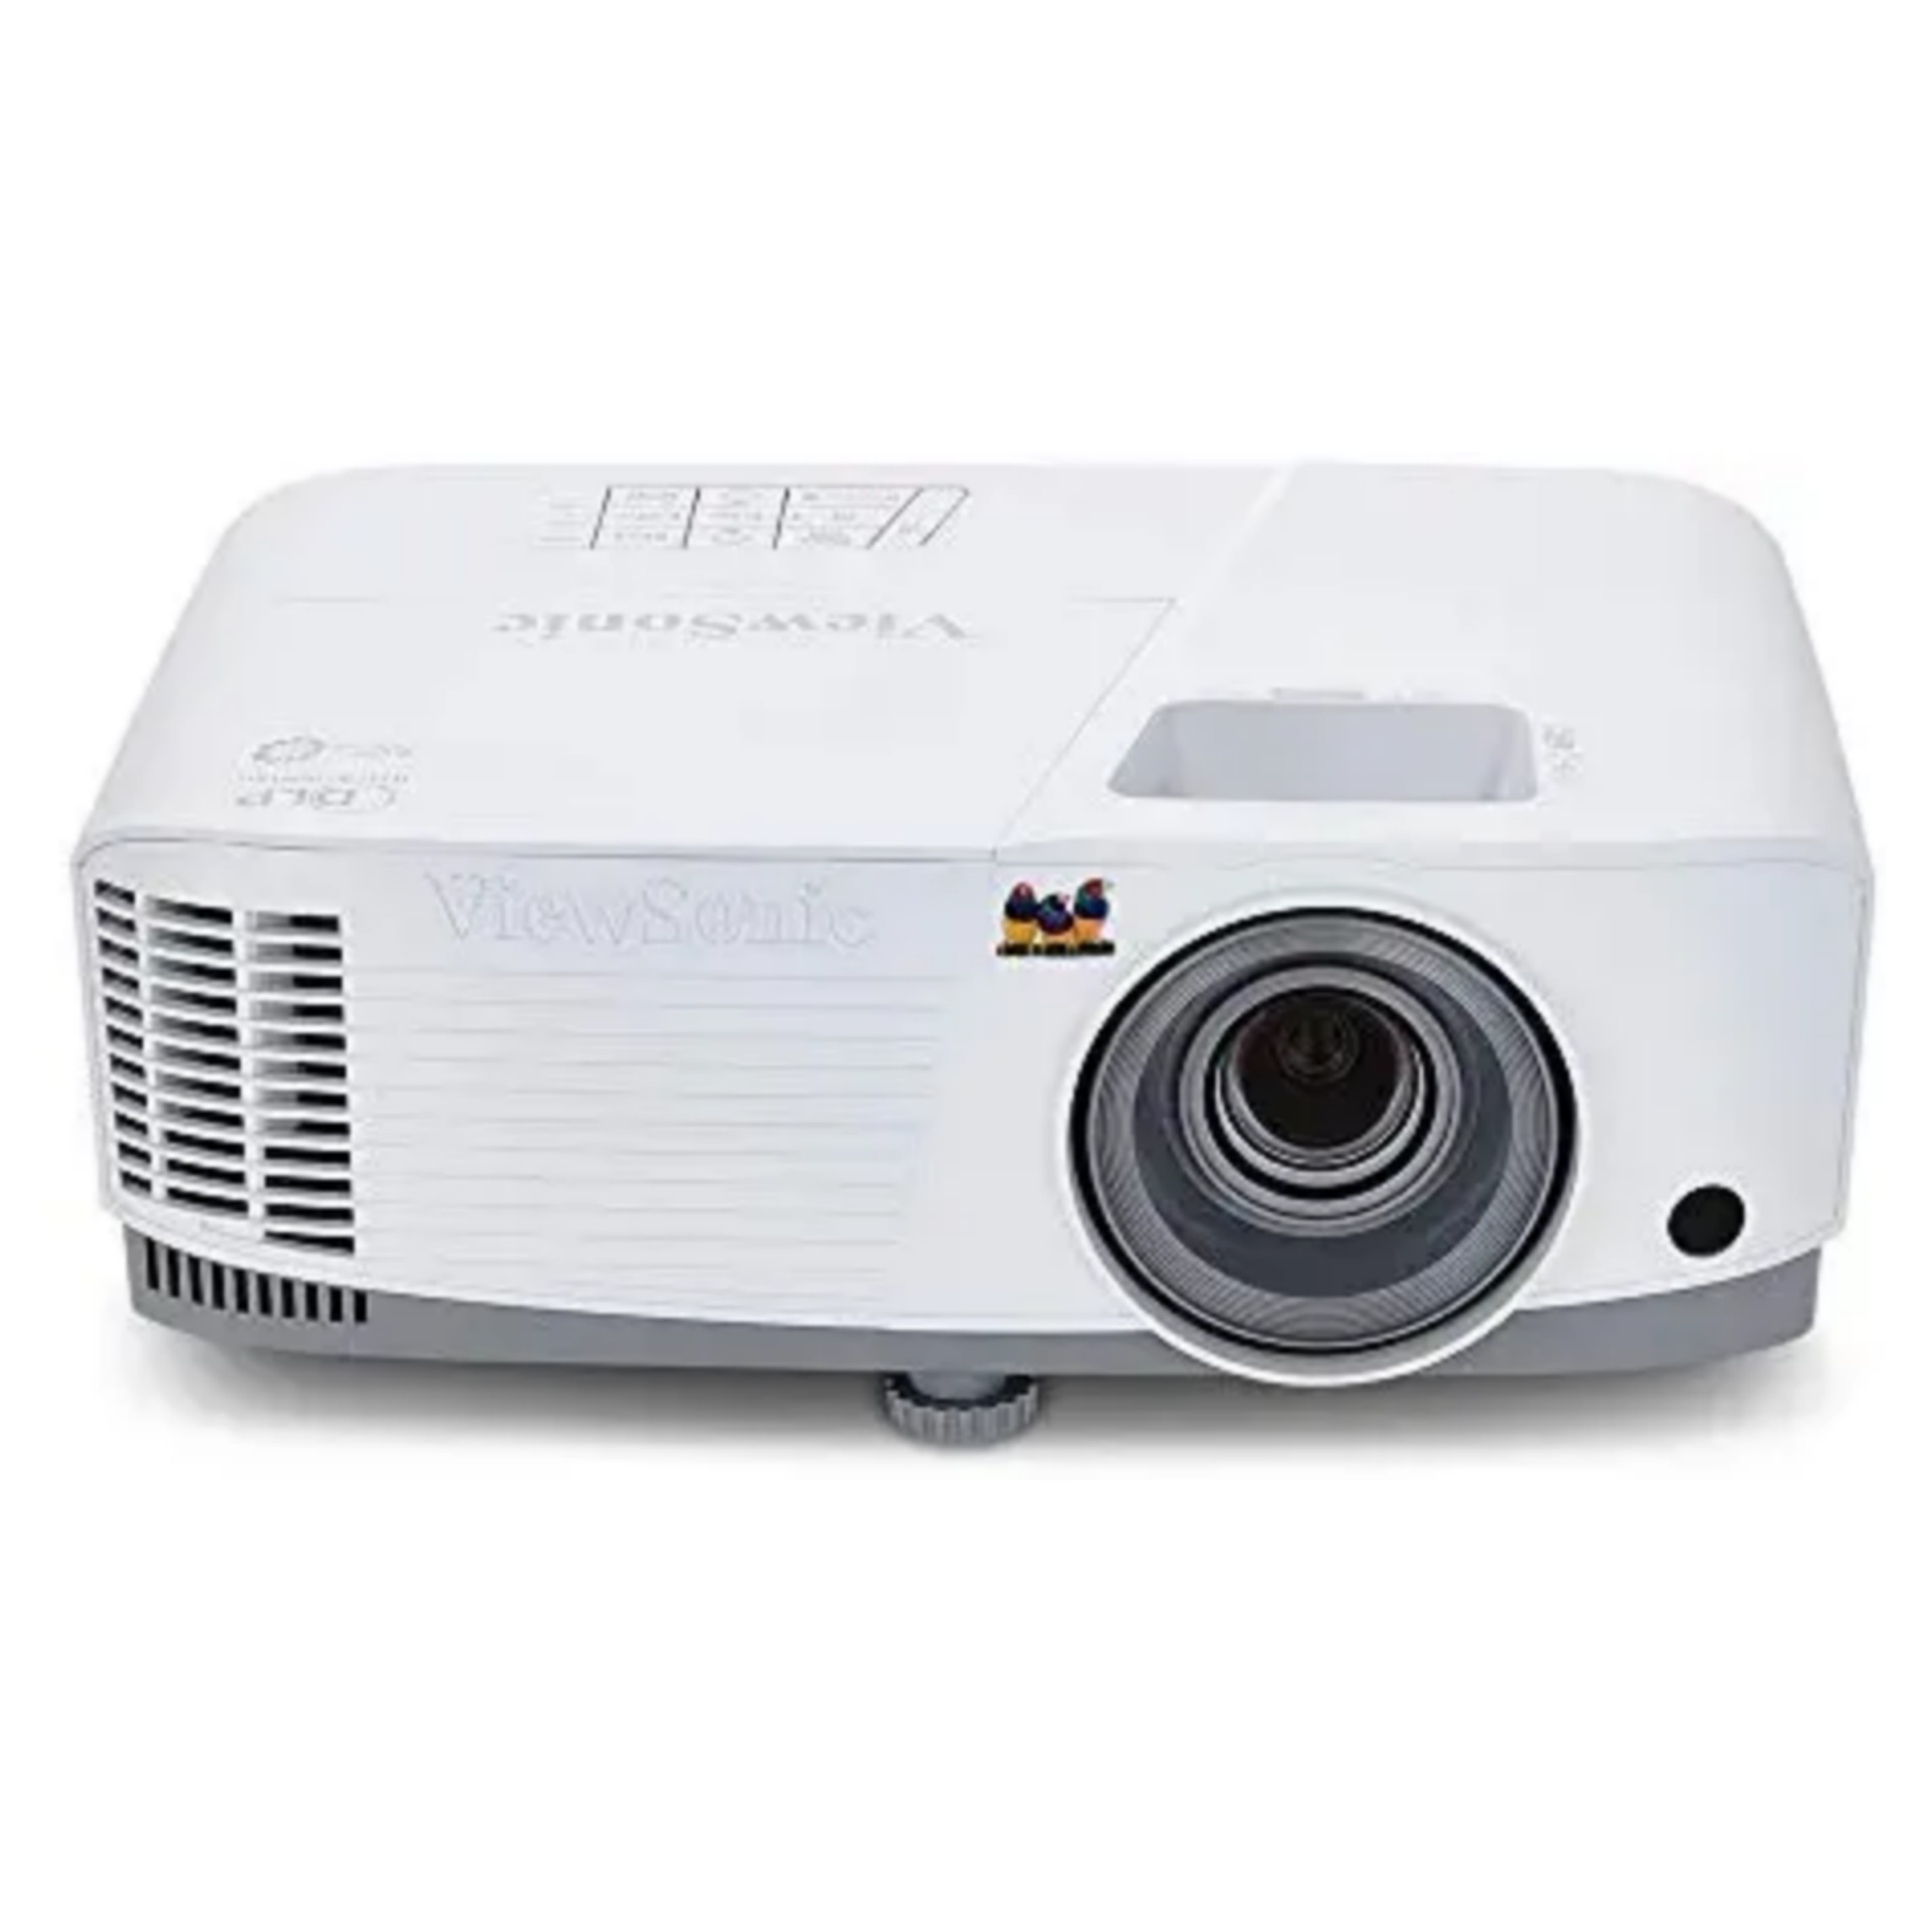 Projector on rent in Ghaziabad